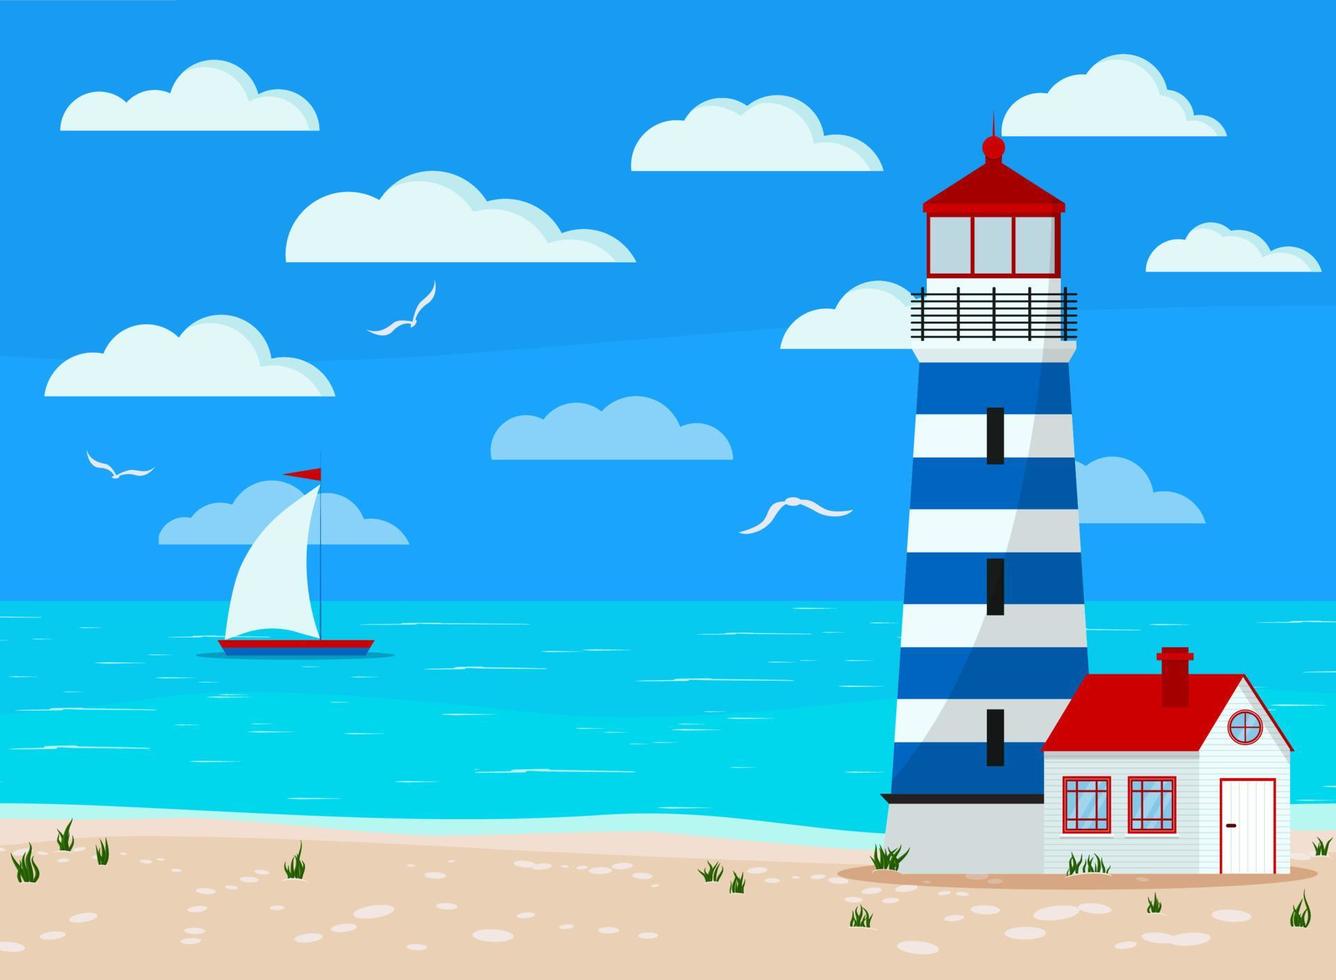 Panoramic calm sea landscape blue ocean, clouds, sand coastline with grass, gull, sailboat, lighthouse. vector